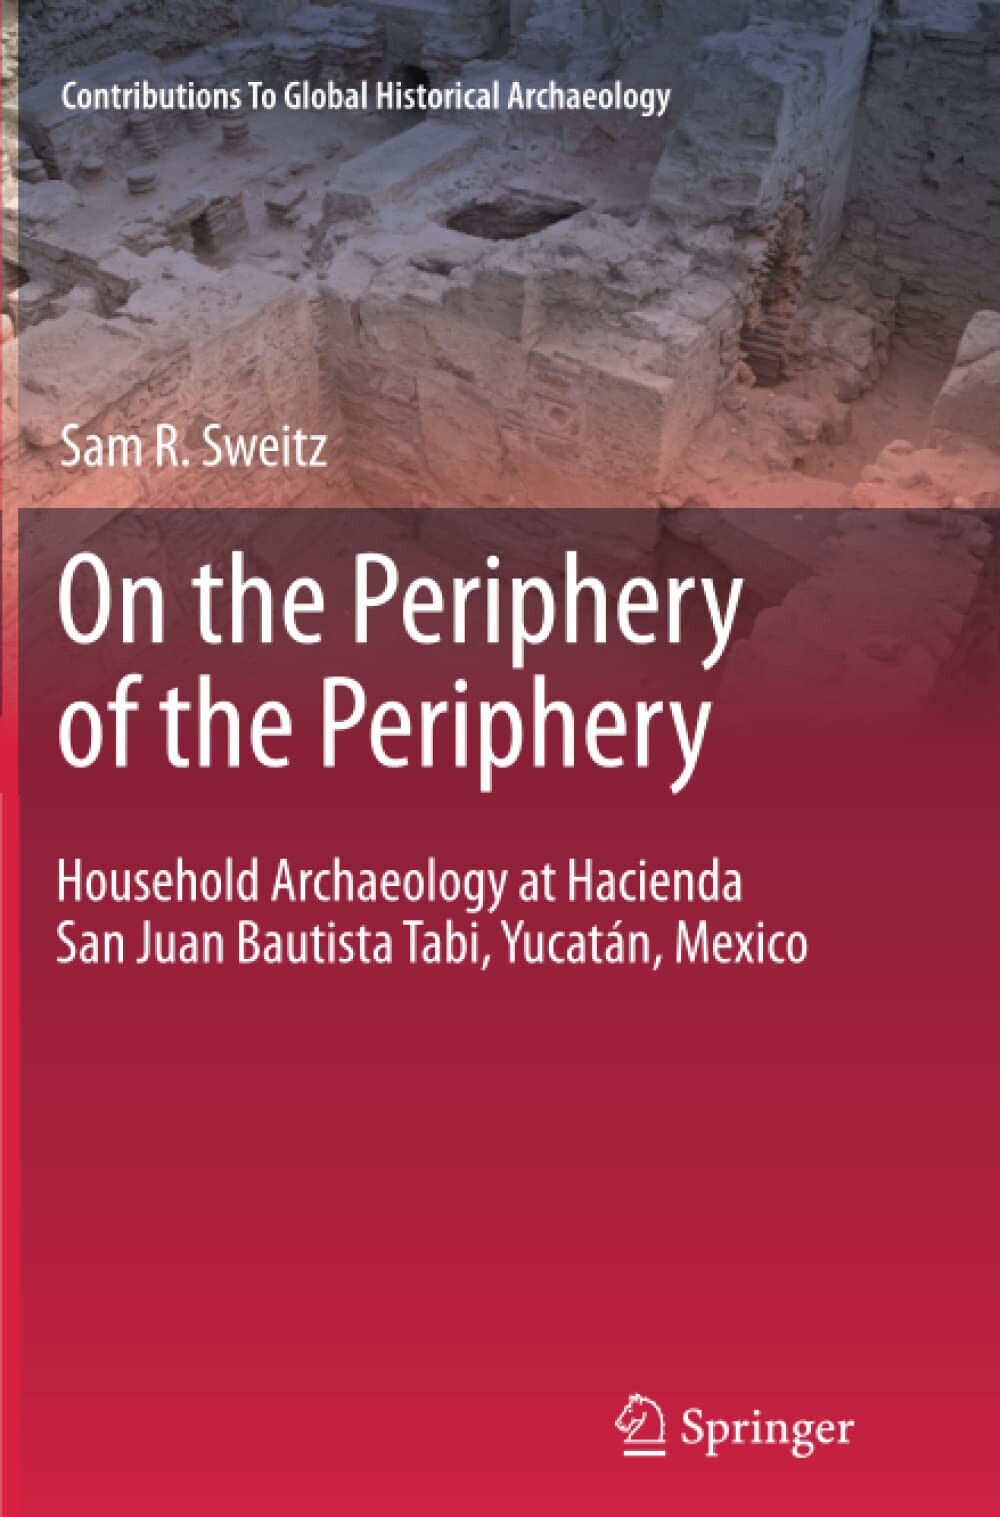 On the Periphery of the Periphery - Samuel Sweitz - Springer, 2014